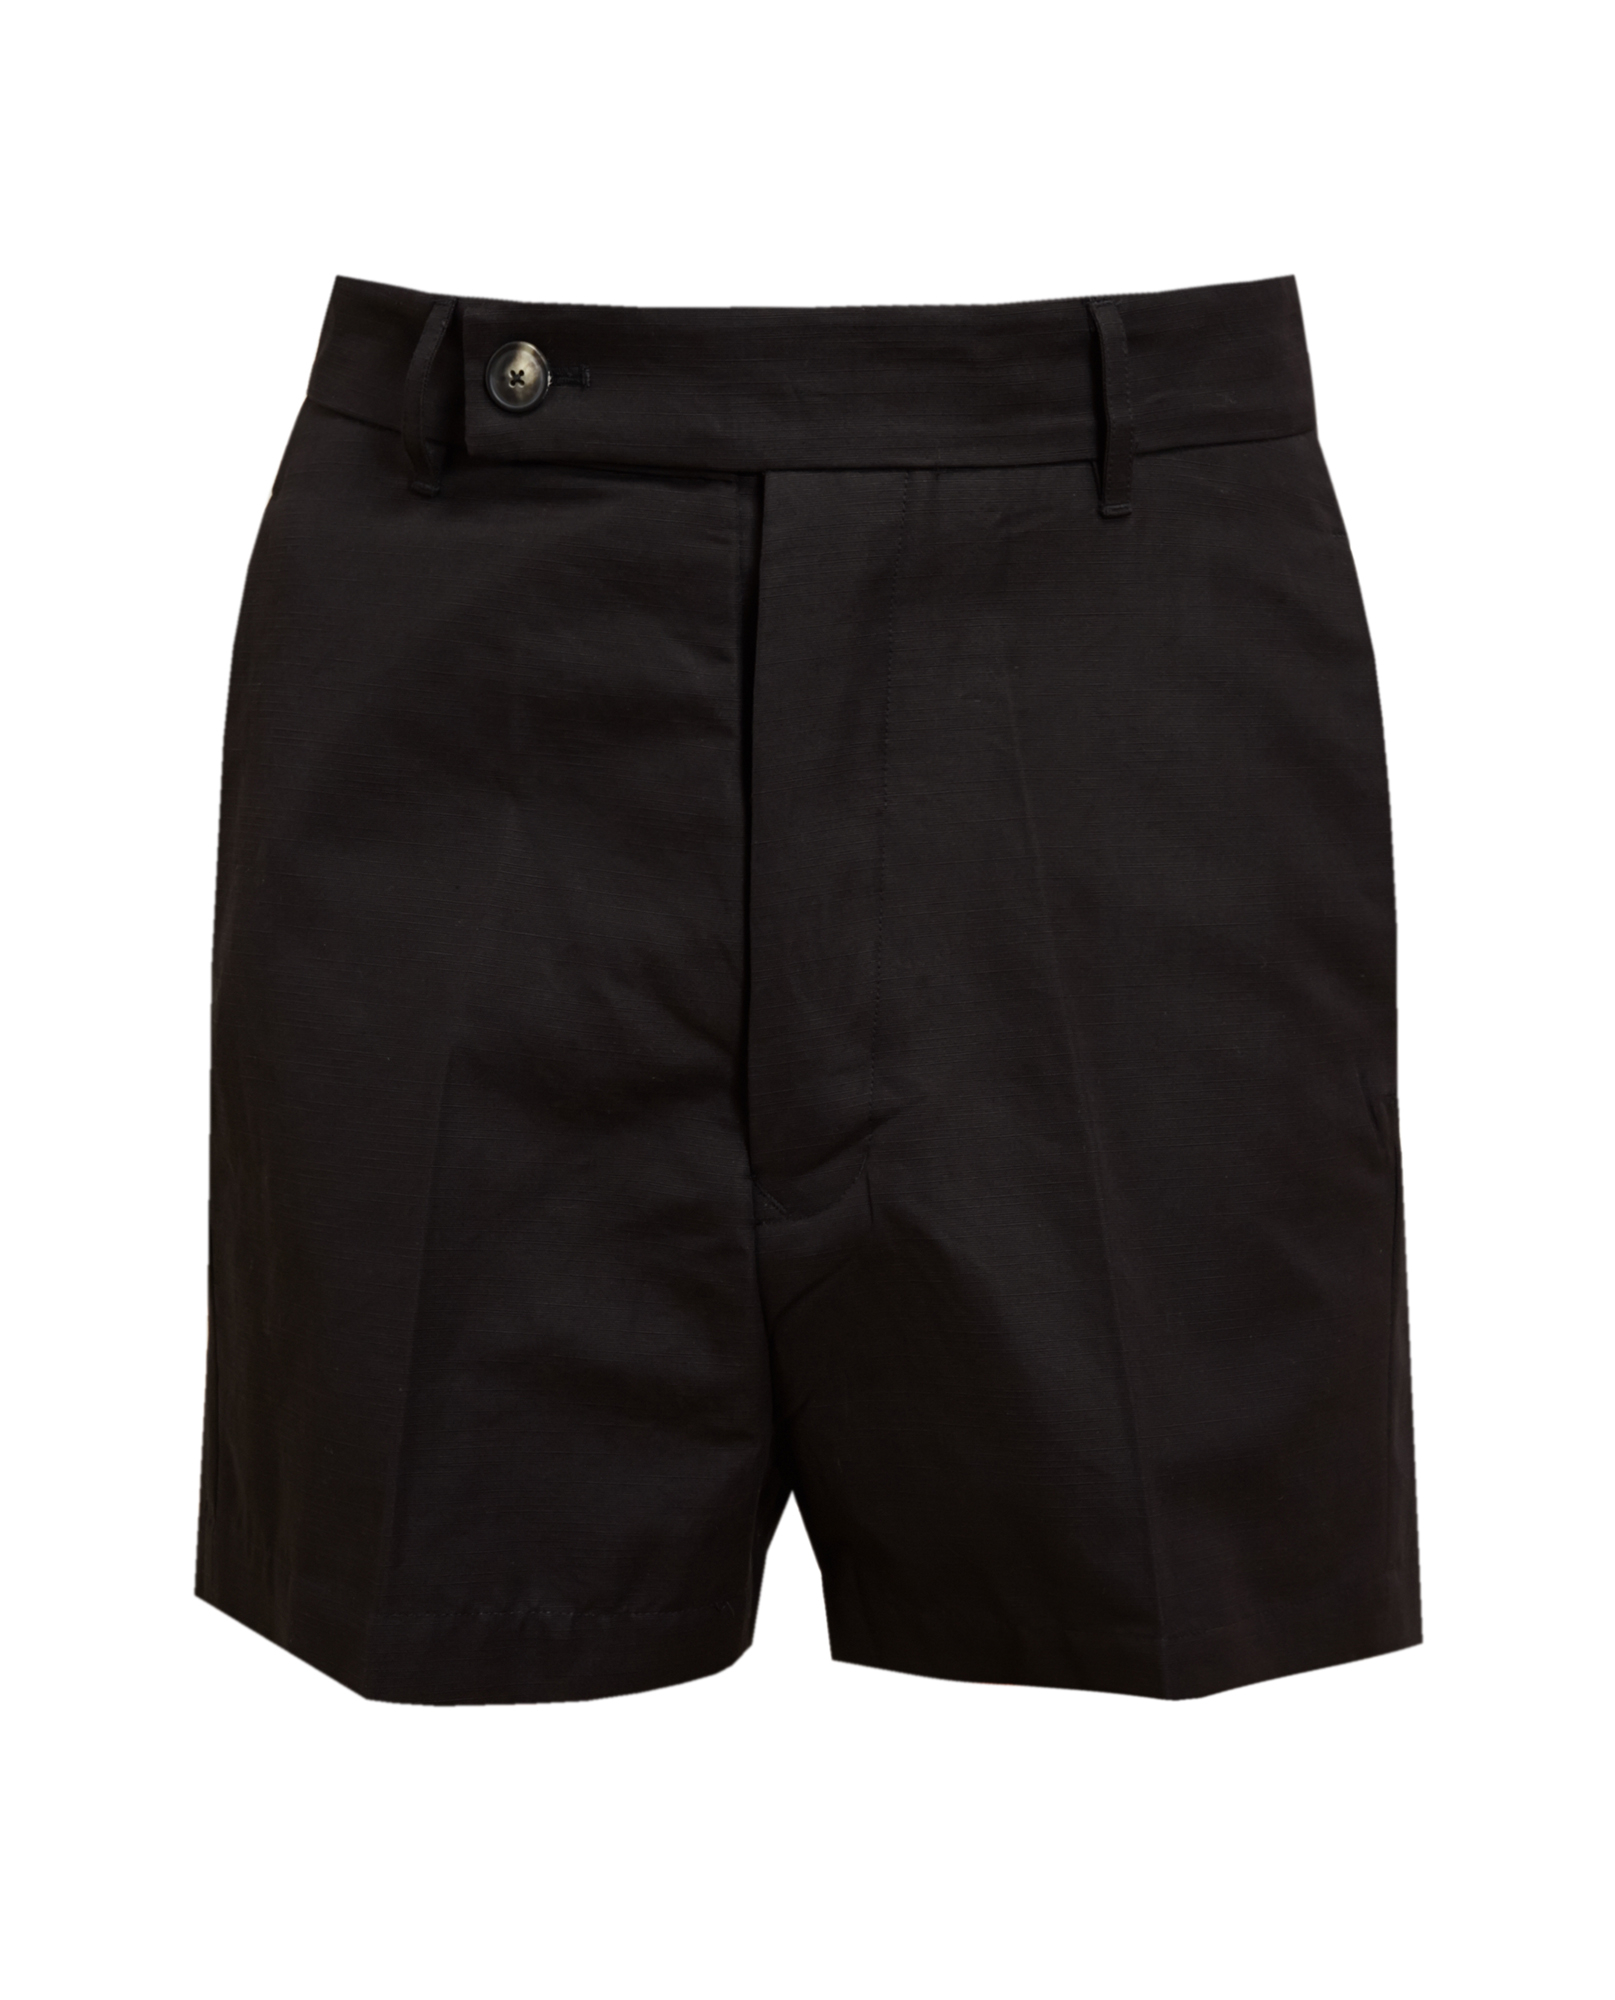 Rick Owens Textured Cotton Shorts in Black for Men | Lyst